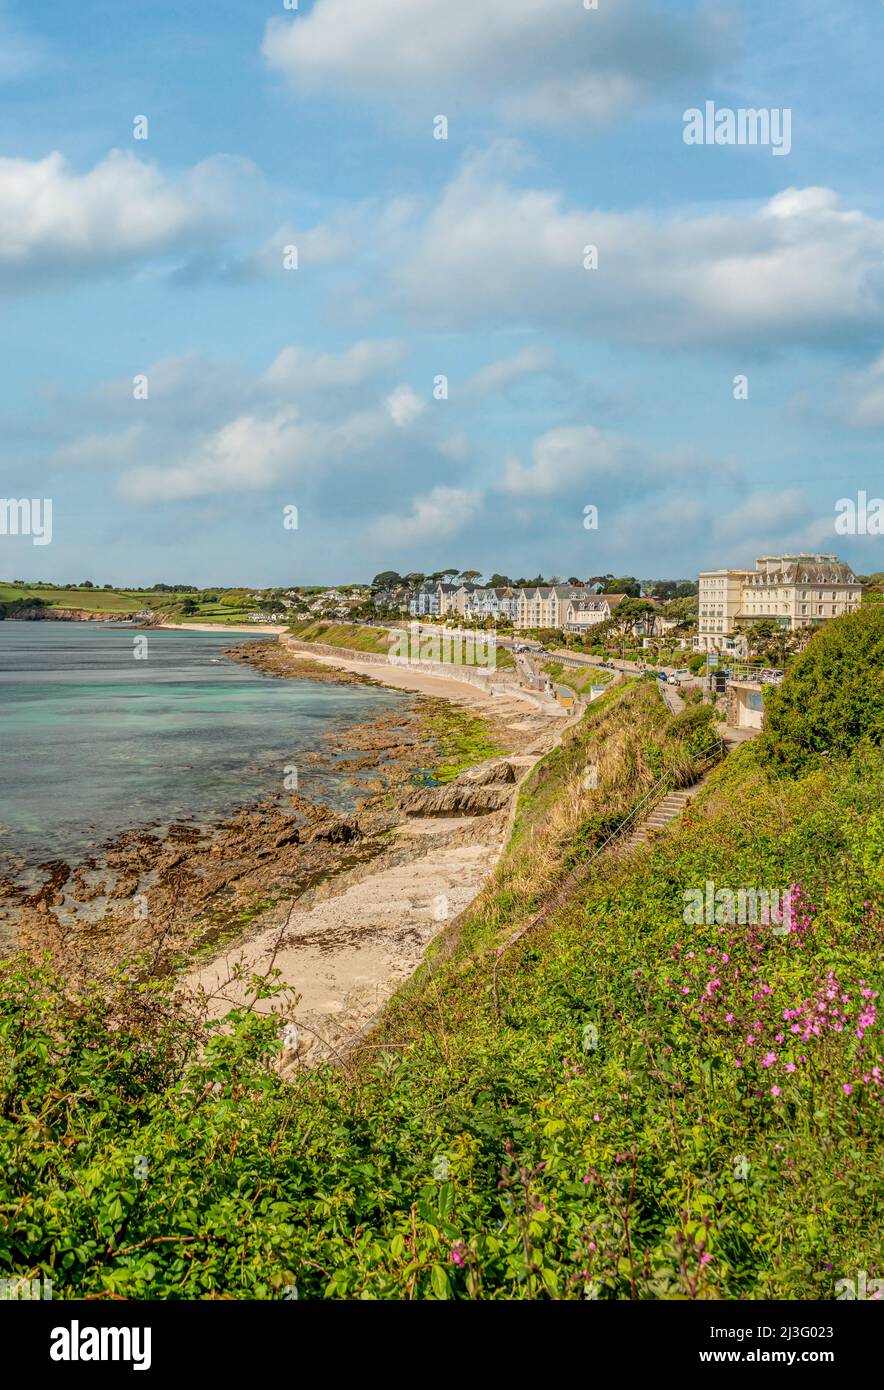 View over Gyllyngvase Beach in Falmouth, Cornwall; England, UK Stock Photo